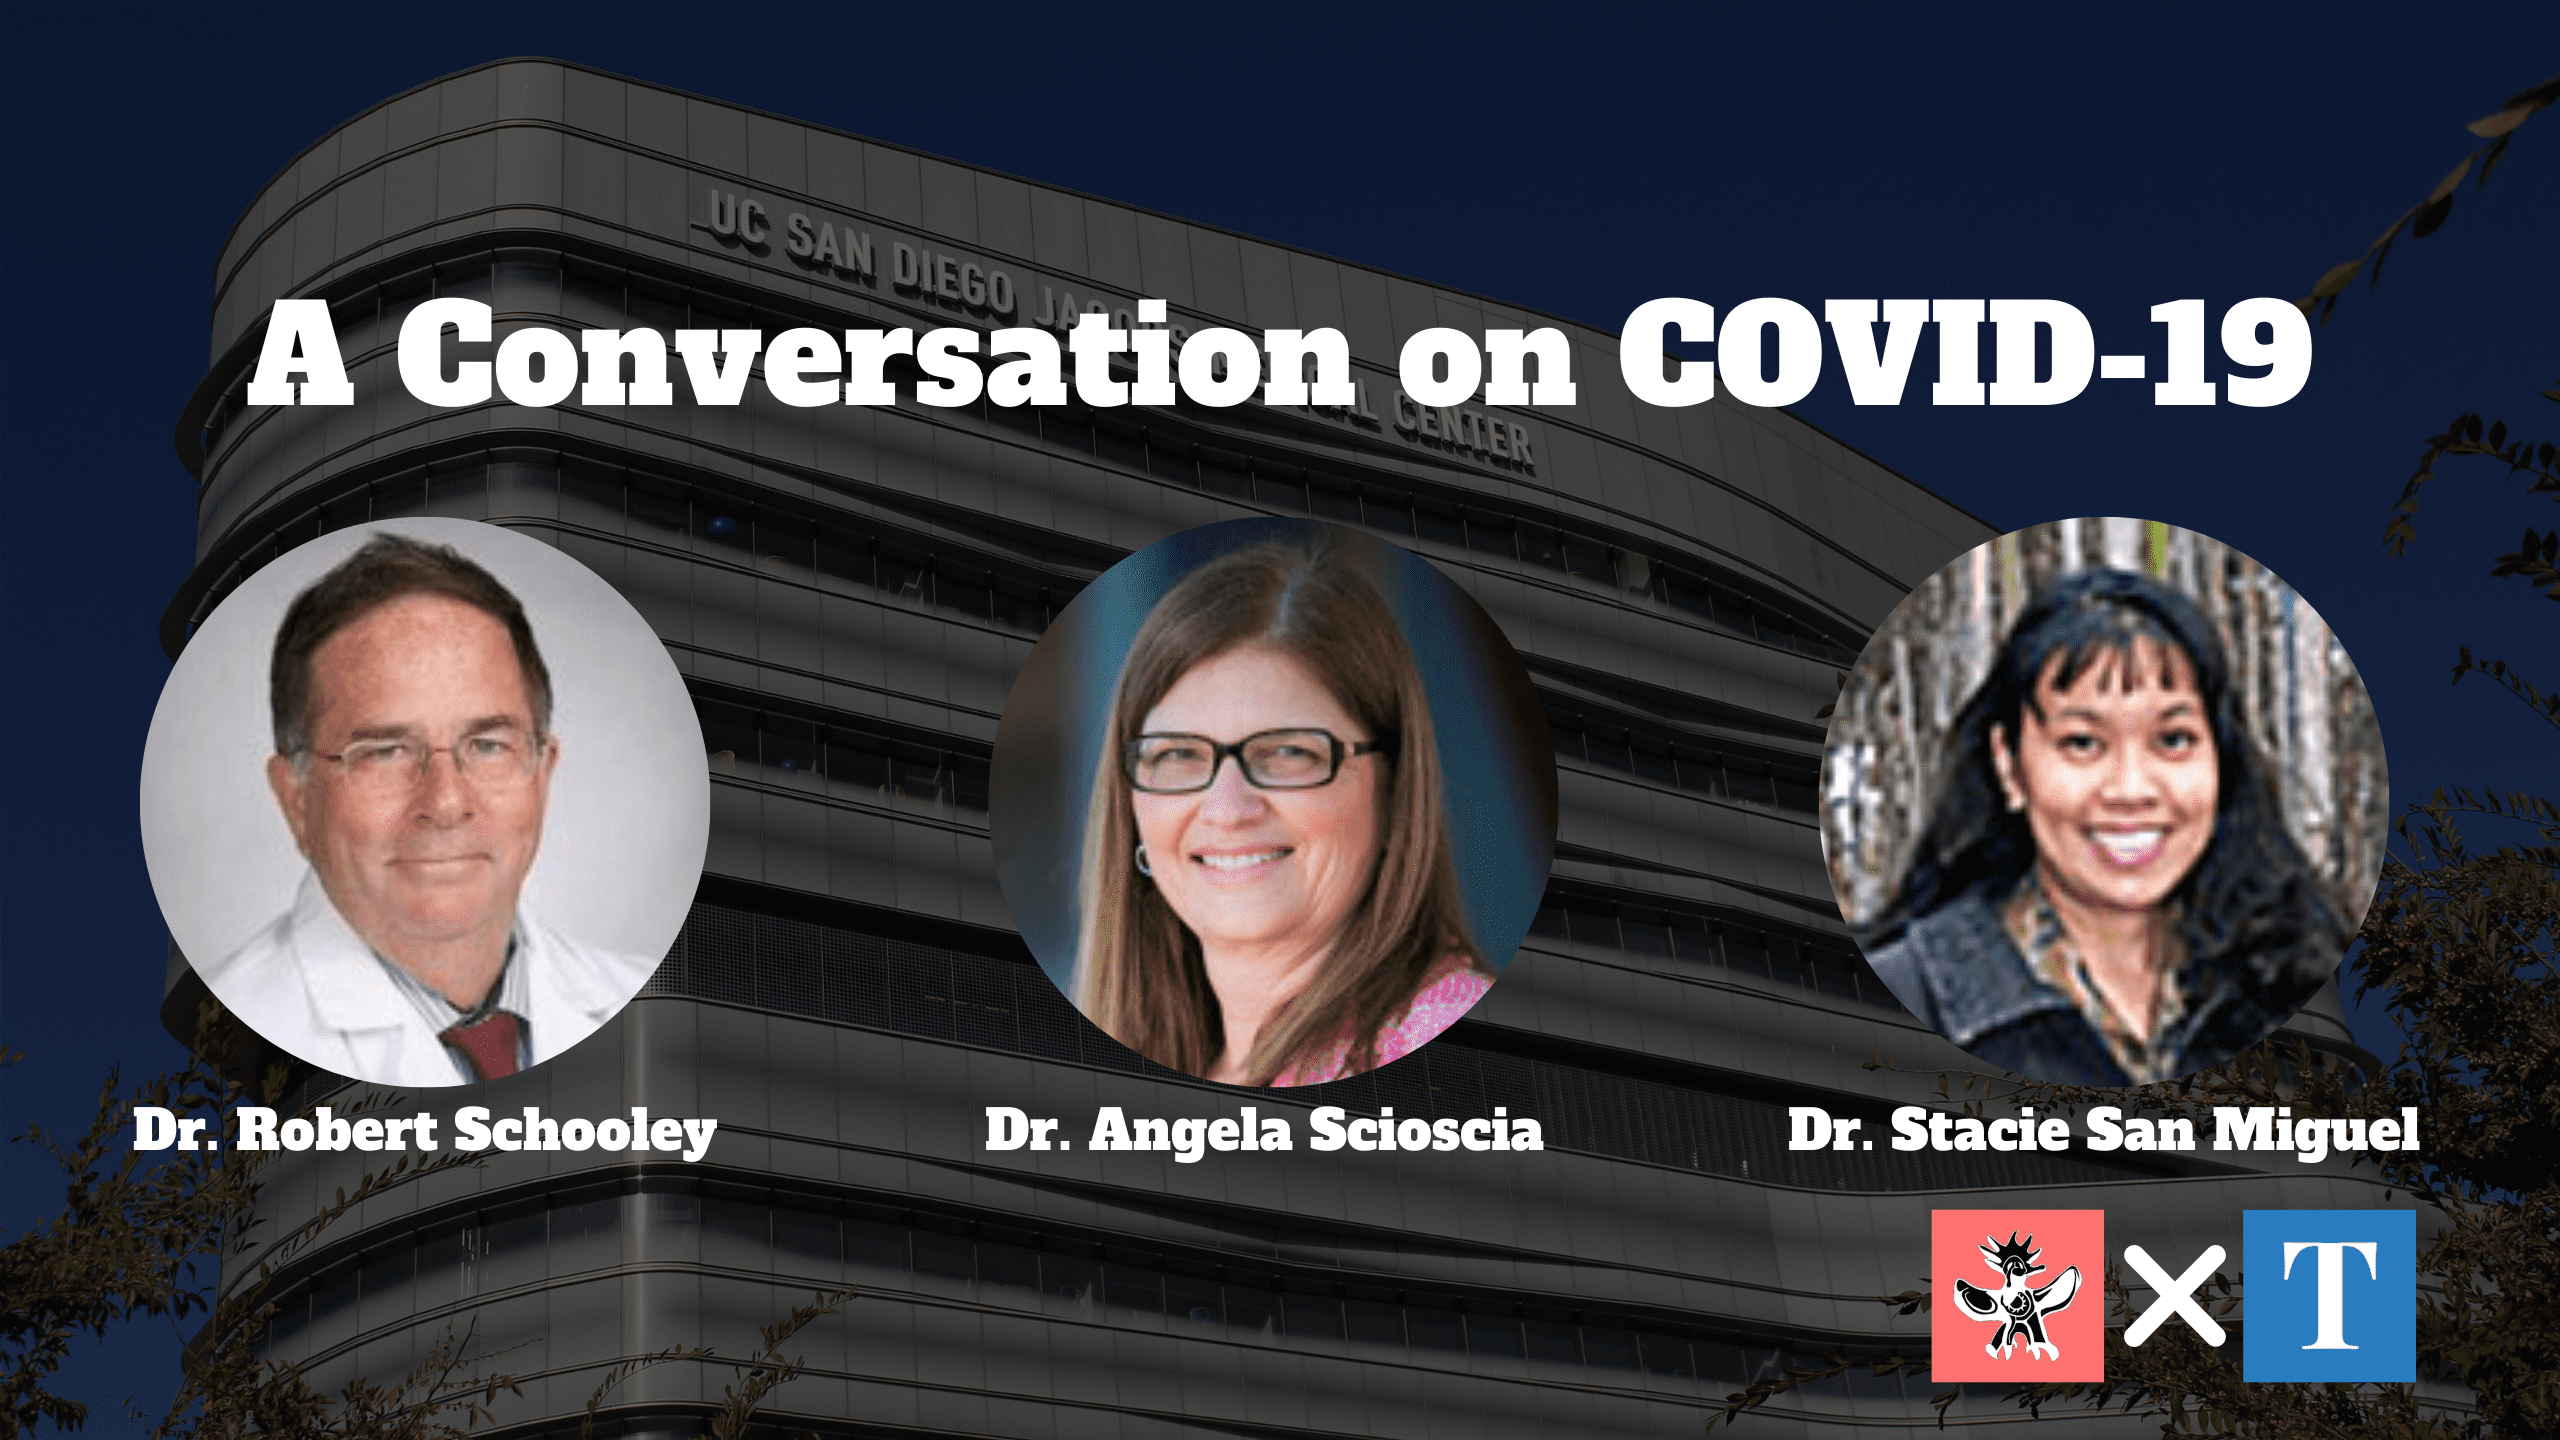 A Conversation on COVID-19 with UCSD’s Dr. Schooley, Dr. San Miguel, and Dr. Scioscia